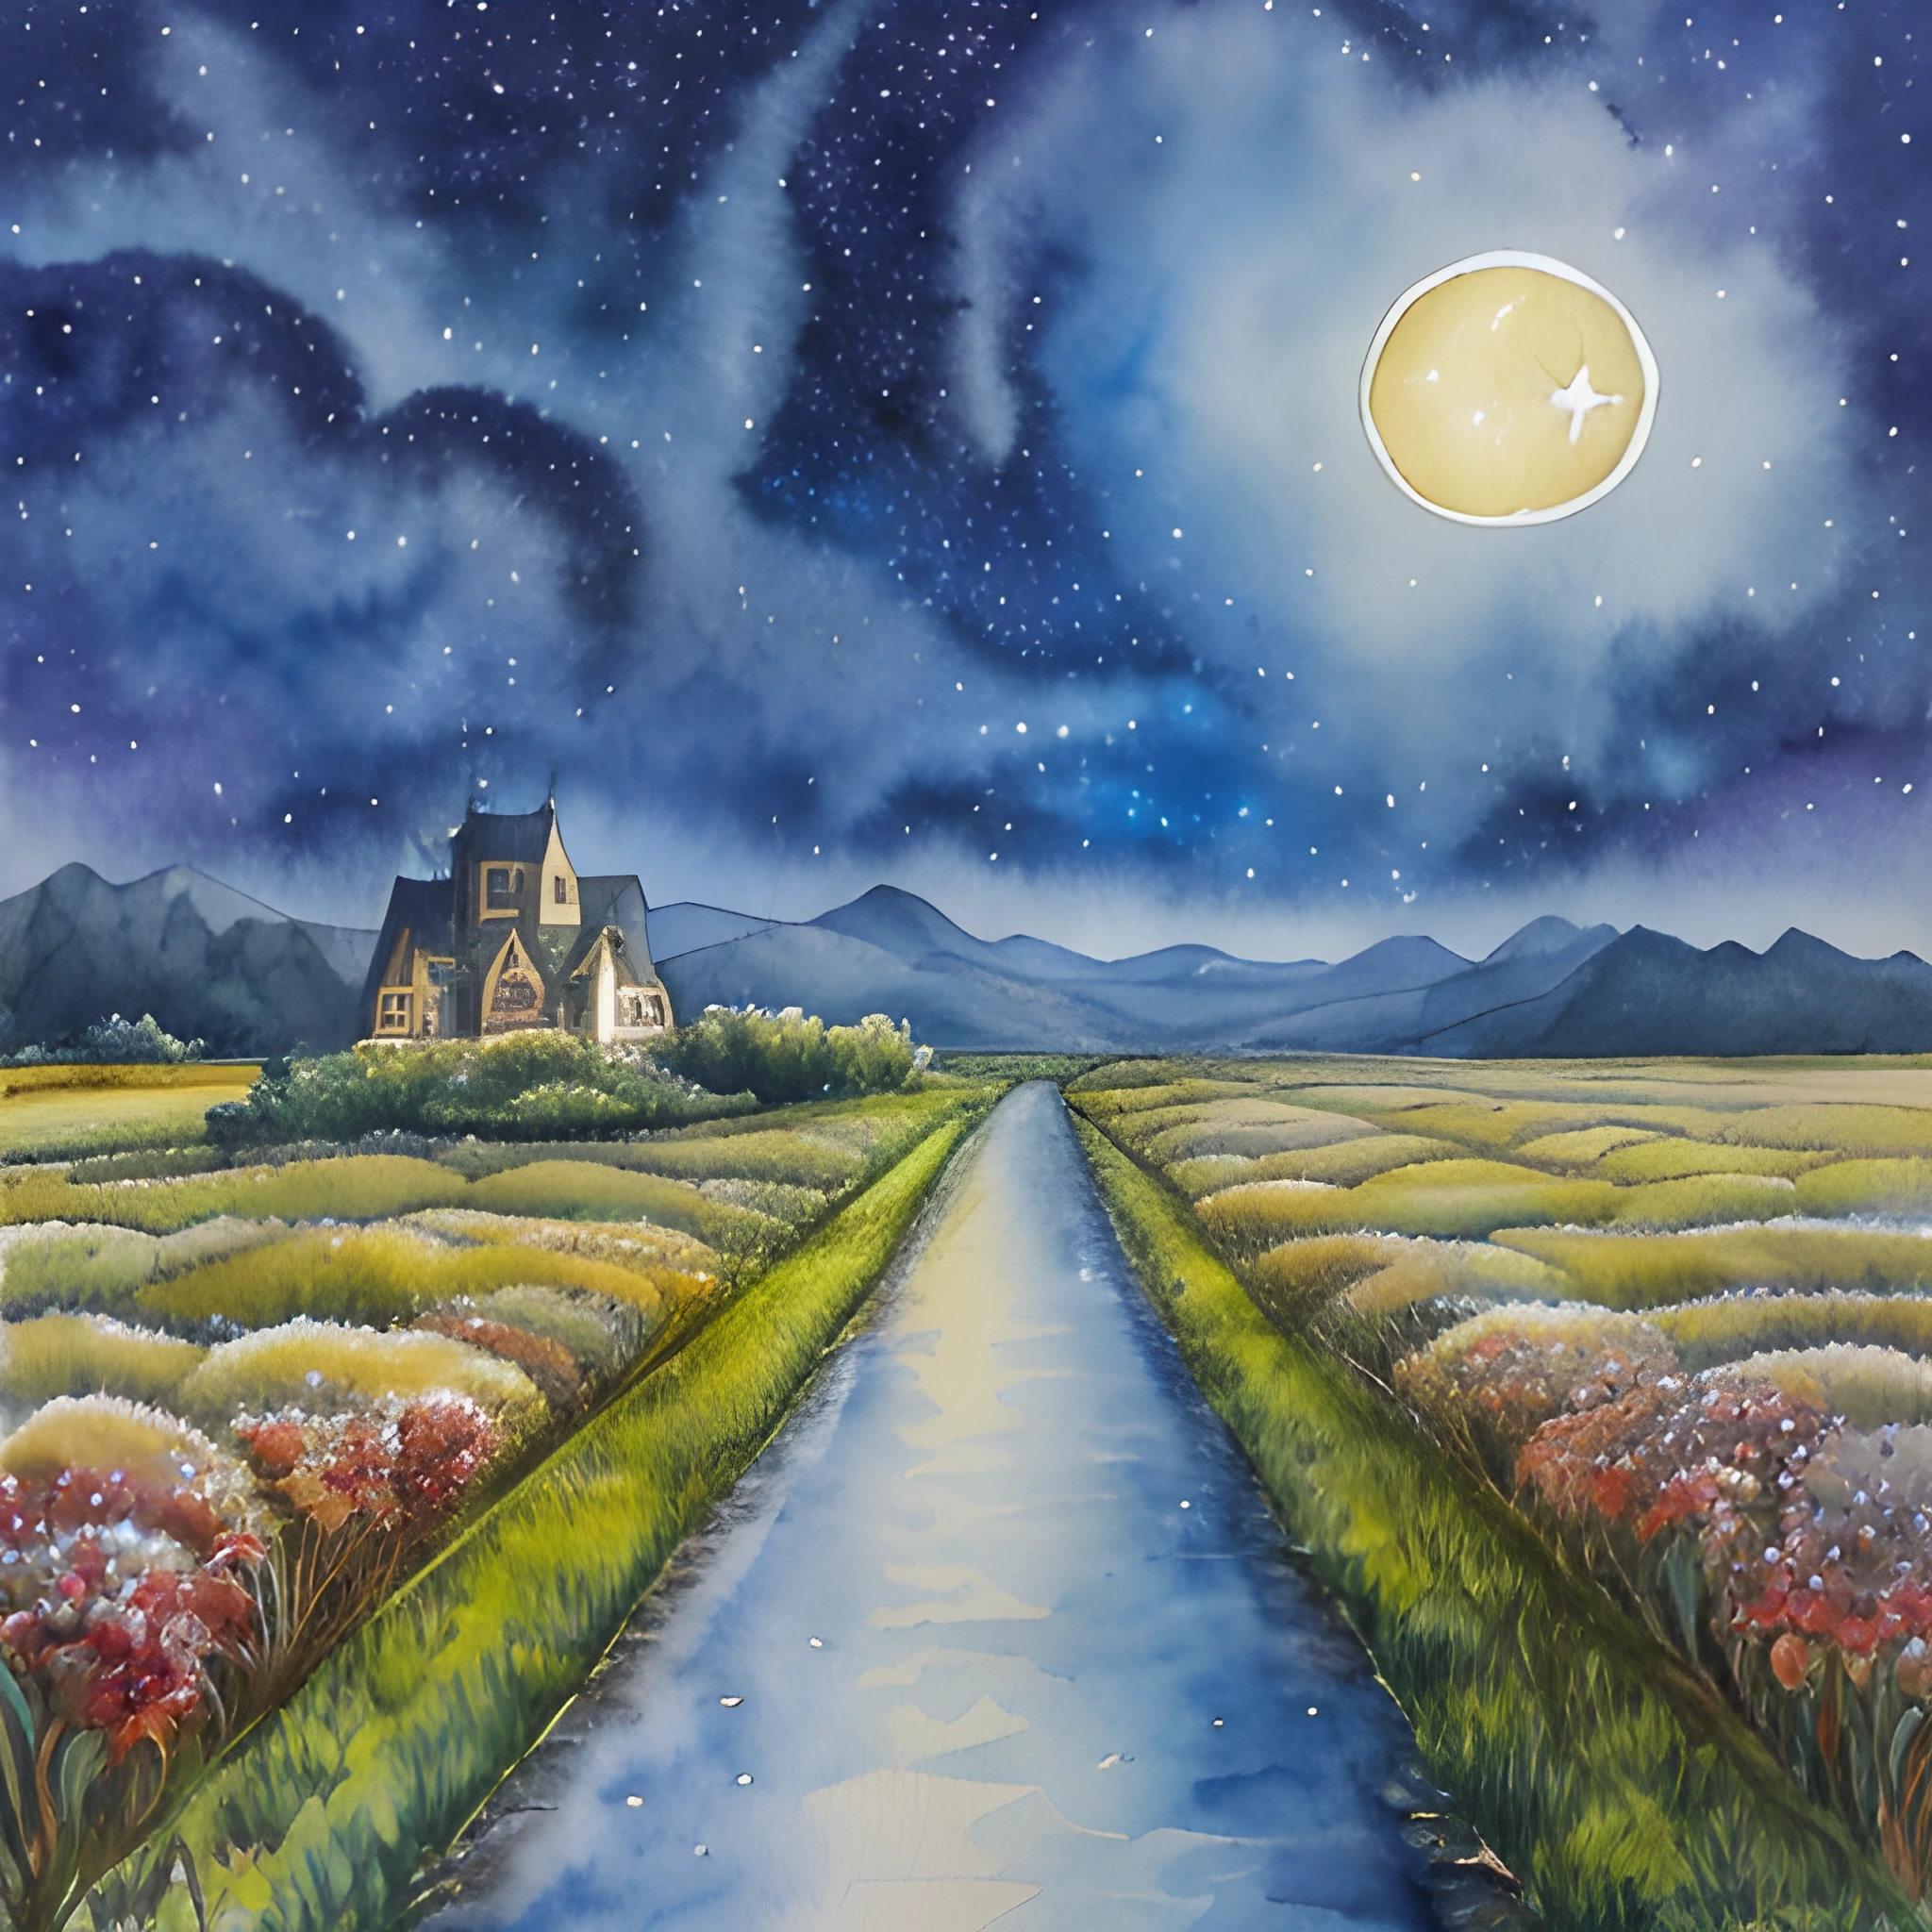 painting of a country road with a house and a star in the sky